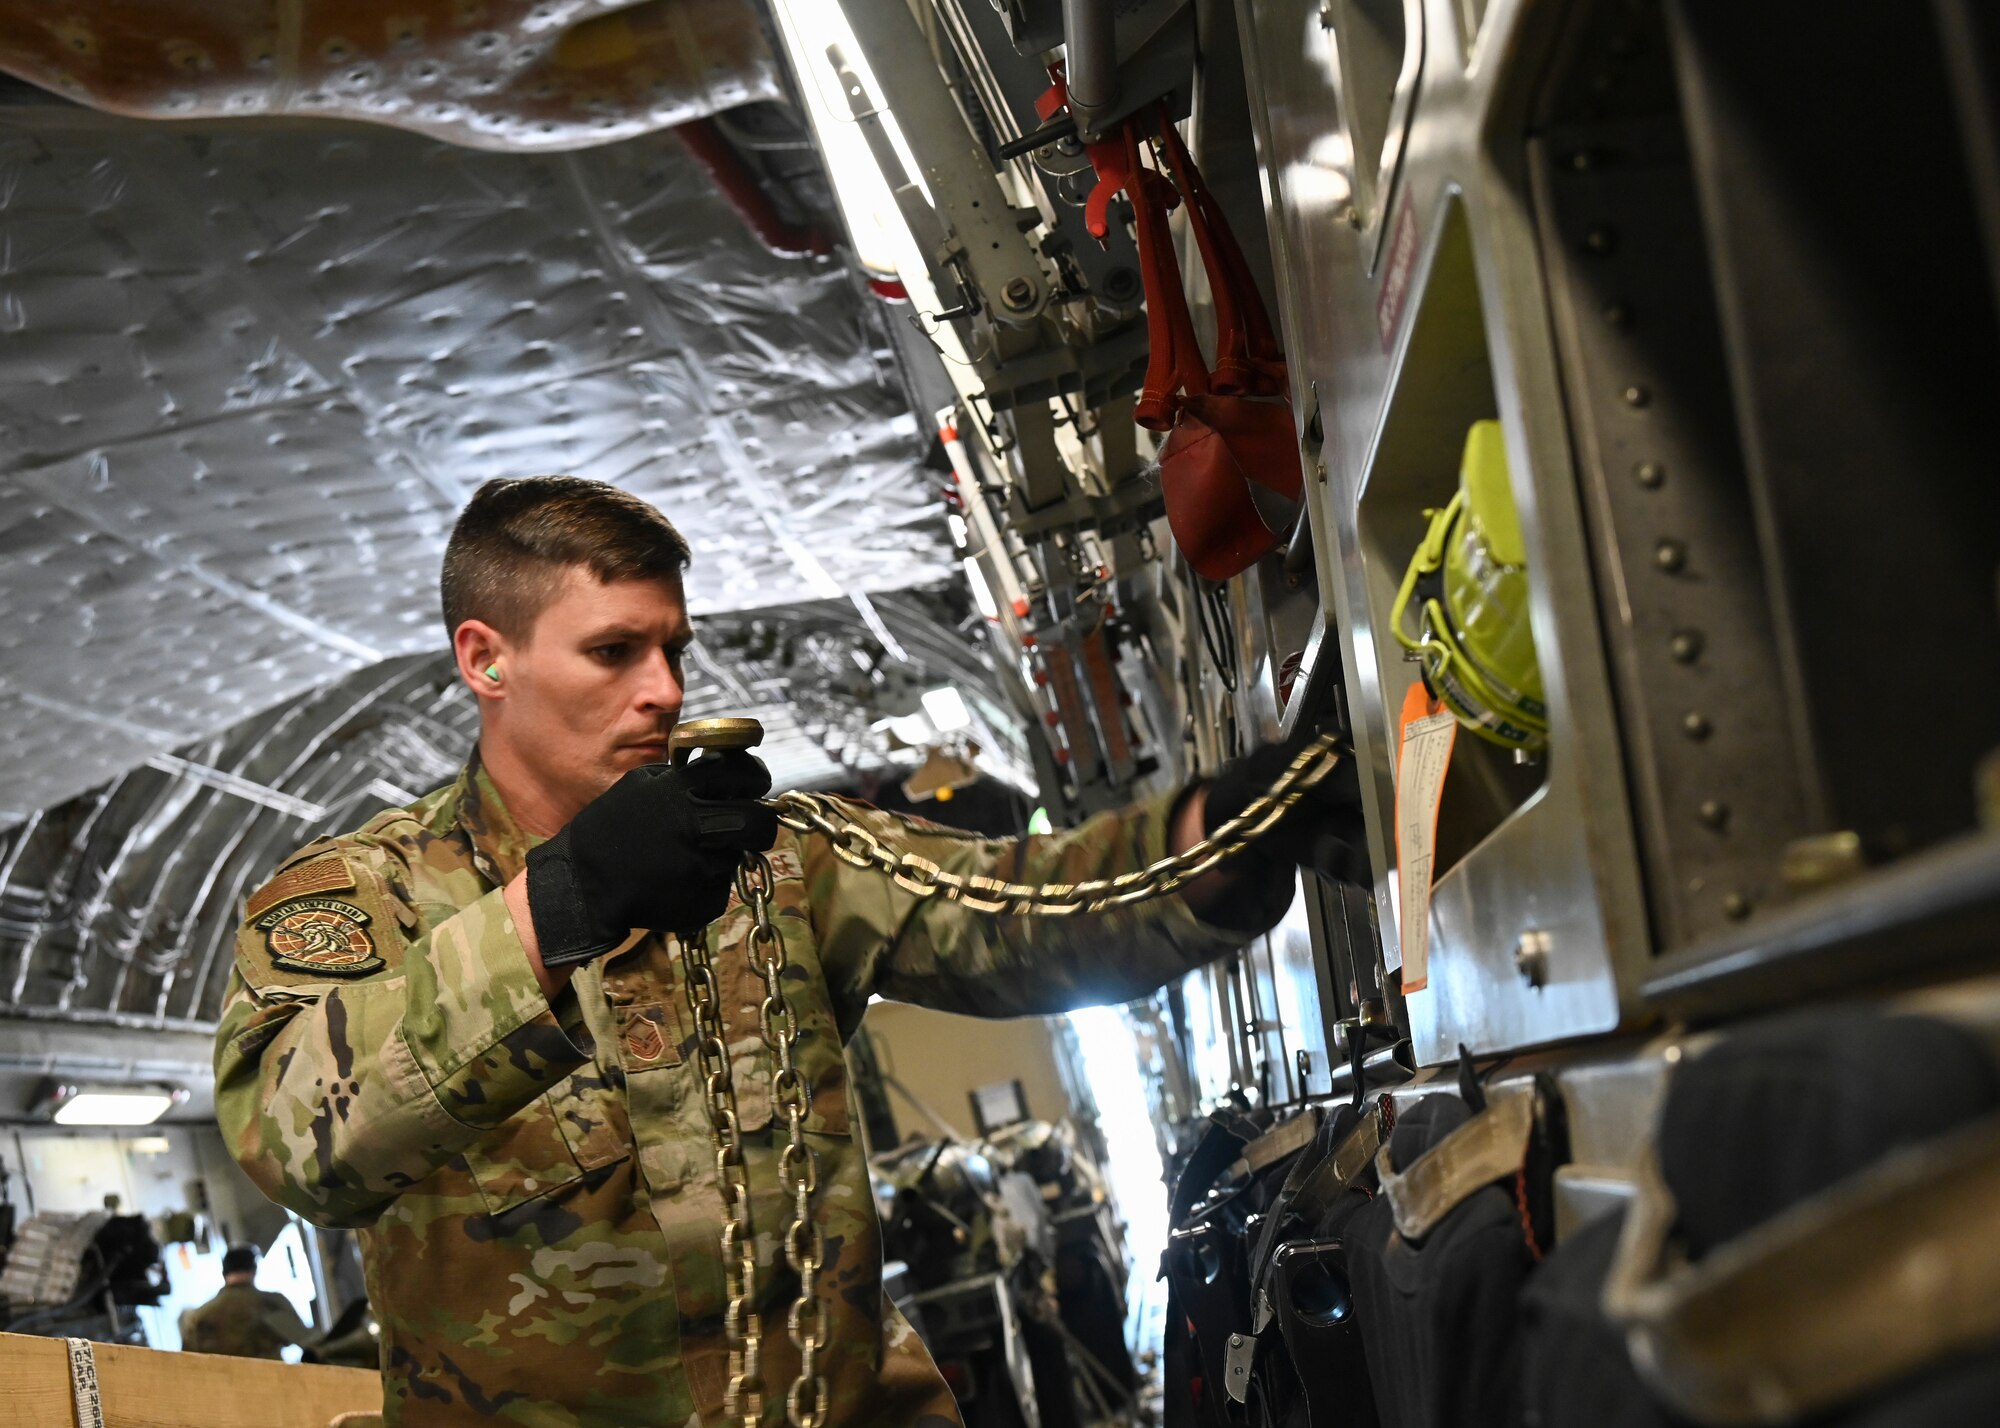 U.S. Air Force Master Sgt. Travis Hall, a crew chief assigned to the 167th Airlift Wing, West Virginia Air National Guard, prepares to unload cargo from a C-17 Globemaster III aircraft during the DEFENDER-Europe 22 exercise, May 23, 2022, in Kuressaare, Estonia.